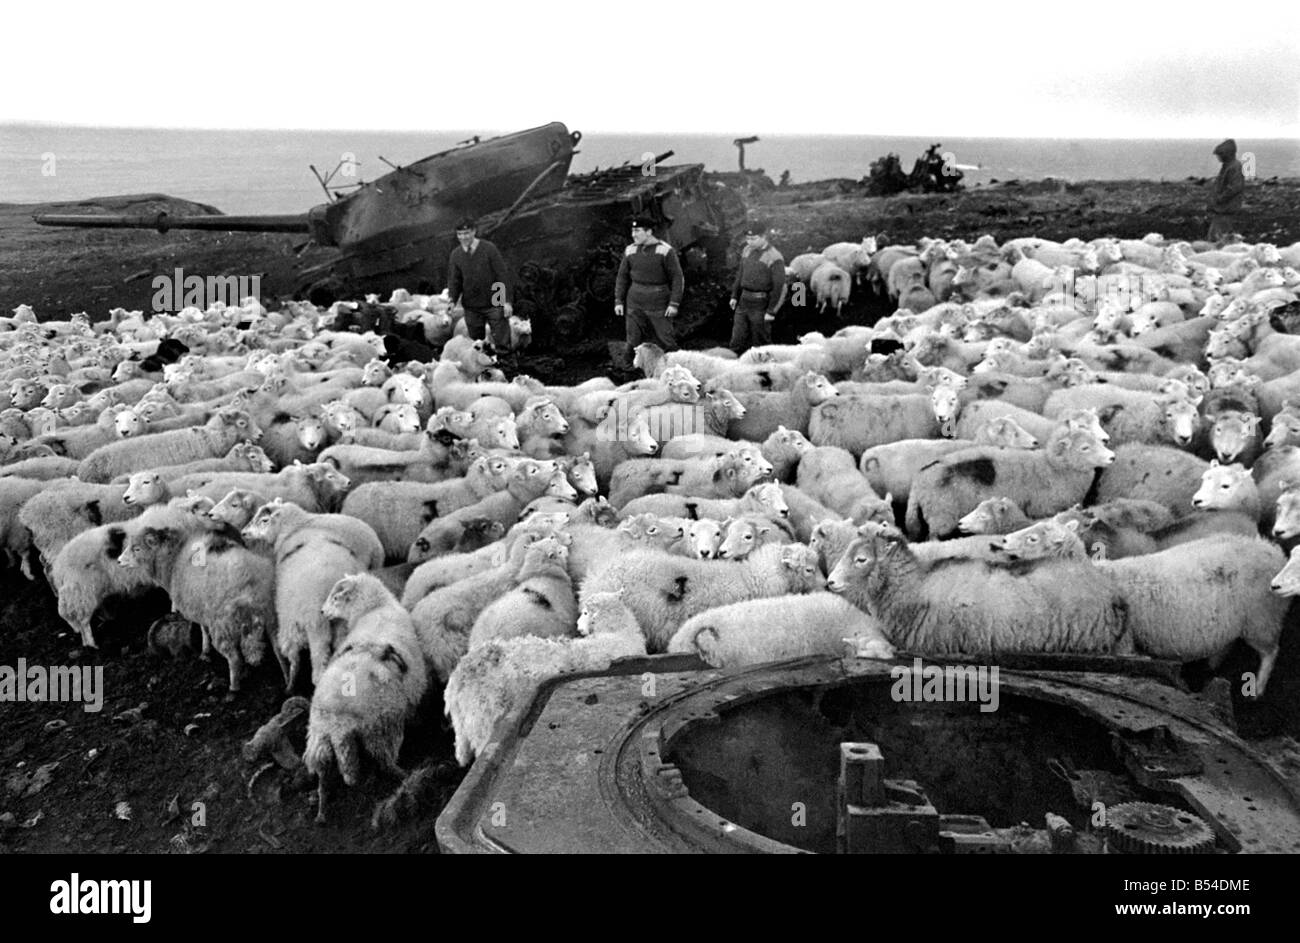 The Army threw open its 6,000 acre, tank range at Castle Martin, Pembs., for the North Pembrokeshire hillside farmers to graze their sheep. The sheep who came down from the cold' quickly sought the protection of the Conquerer target tank as a windshield and made 'shepherds' of Staff Sgt. Alan Healy, Trooper Bob Bartlett, and L/Cpl Lawrence Carter members of the 1st The Queens Dragoon Guards, R.A.C. who were making an inspection of the target tanks on the Castle Martin range. December 1969 Z11477-004 Stock Photo